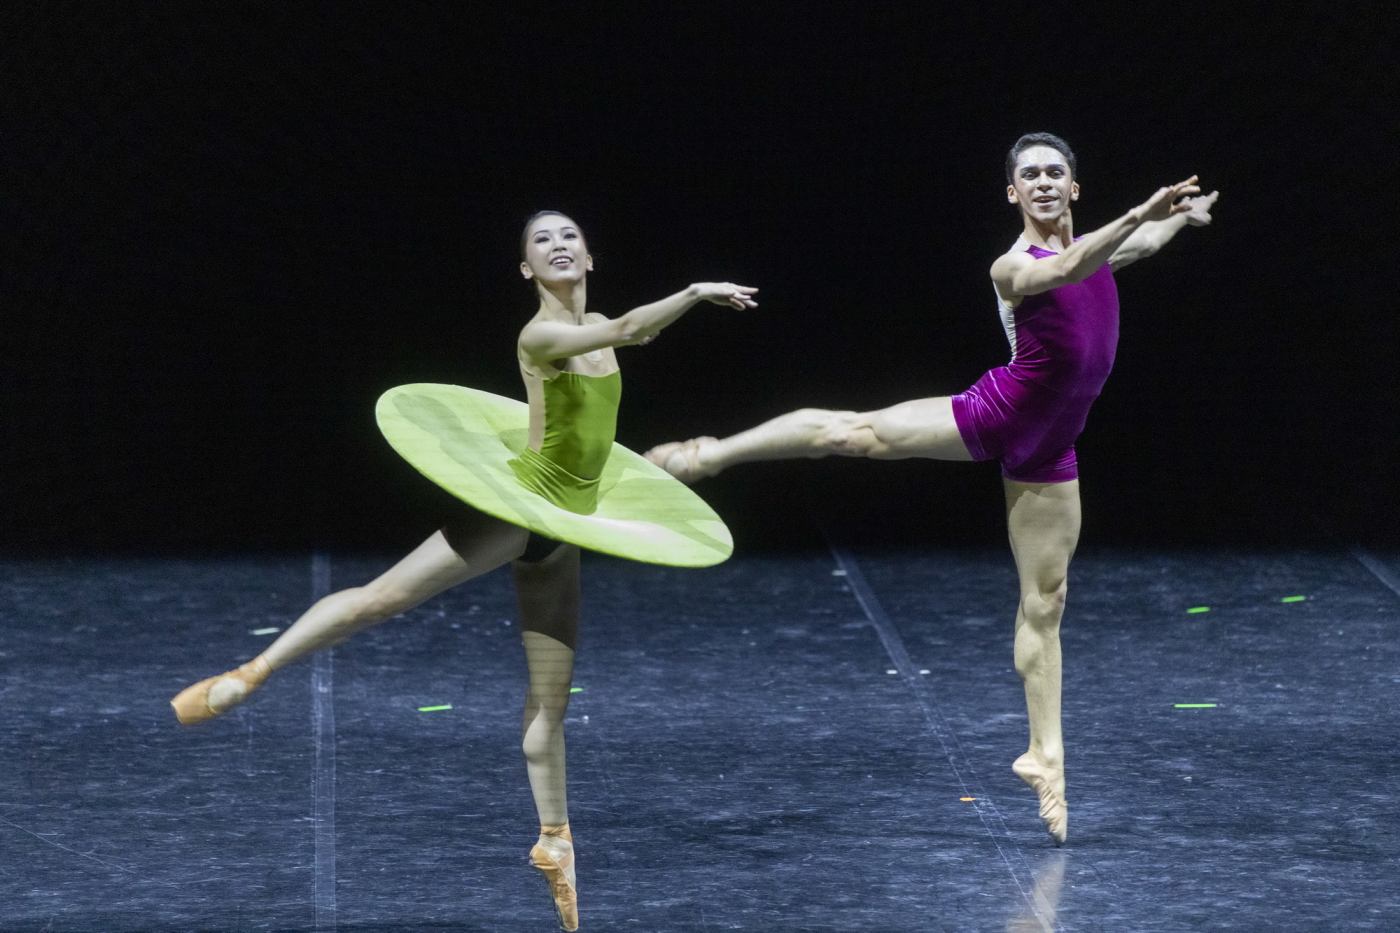 11. Y.Guerra and Y.Wakabayashi, “The Vertiginous Thrill of Exactitude” by W.Forsythe; Ballet of the Hungarian State Opera 2022 © P.Rákossy / Hungarian State Opera 